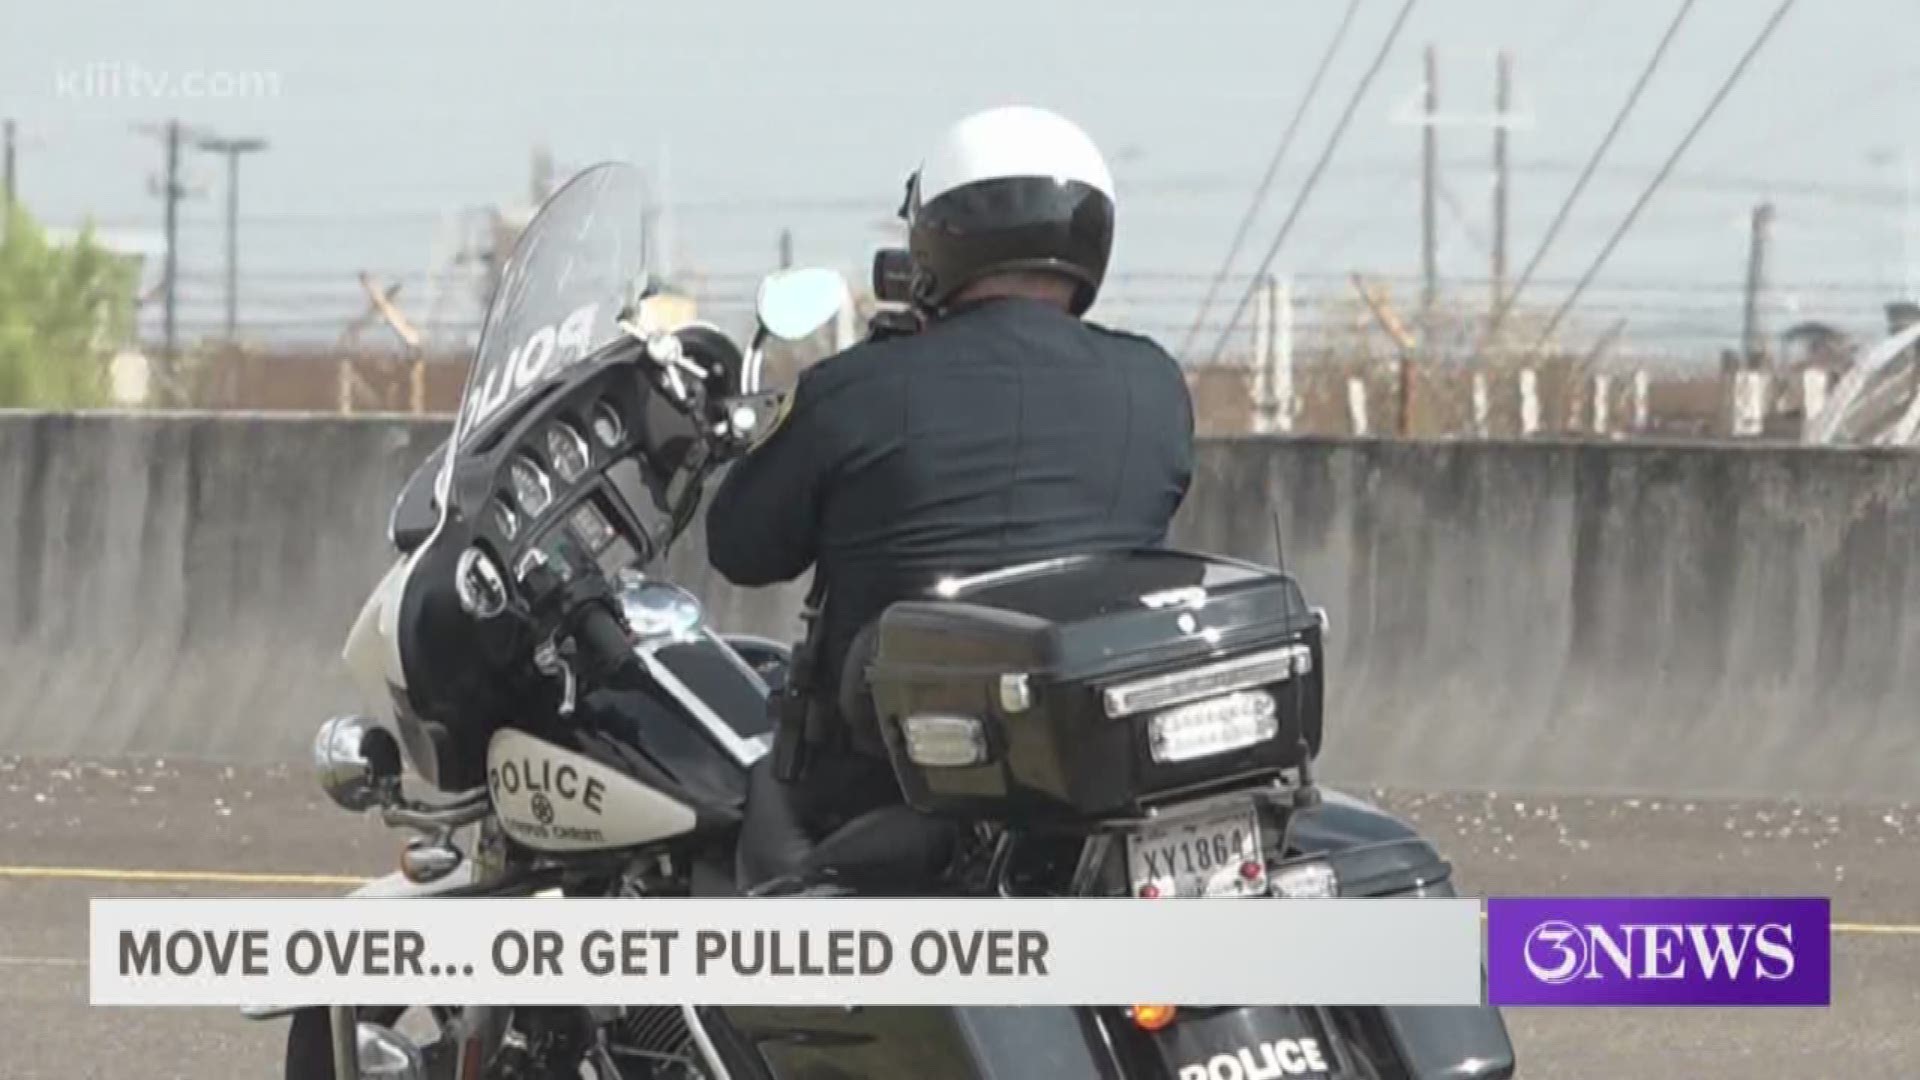 The Corpus Christi Police Department set up scene along the freeway Tuesday morning involving a tow truck working an accident scene on the shoulder. They wanted to see if people would obey the state's move over law.